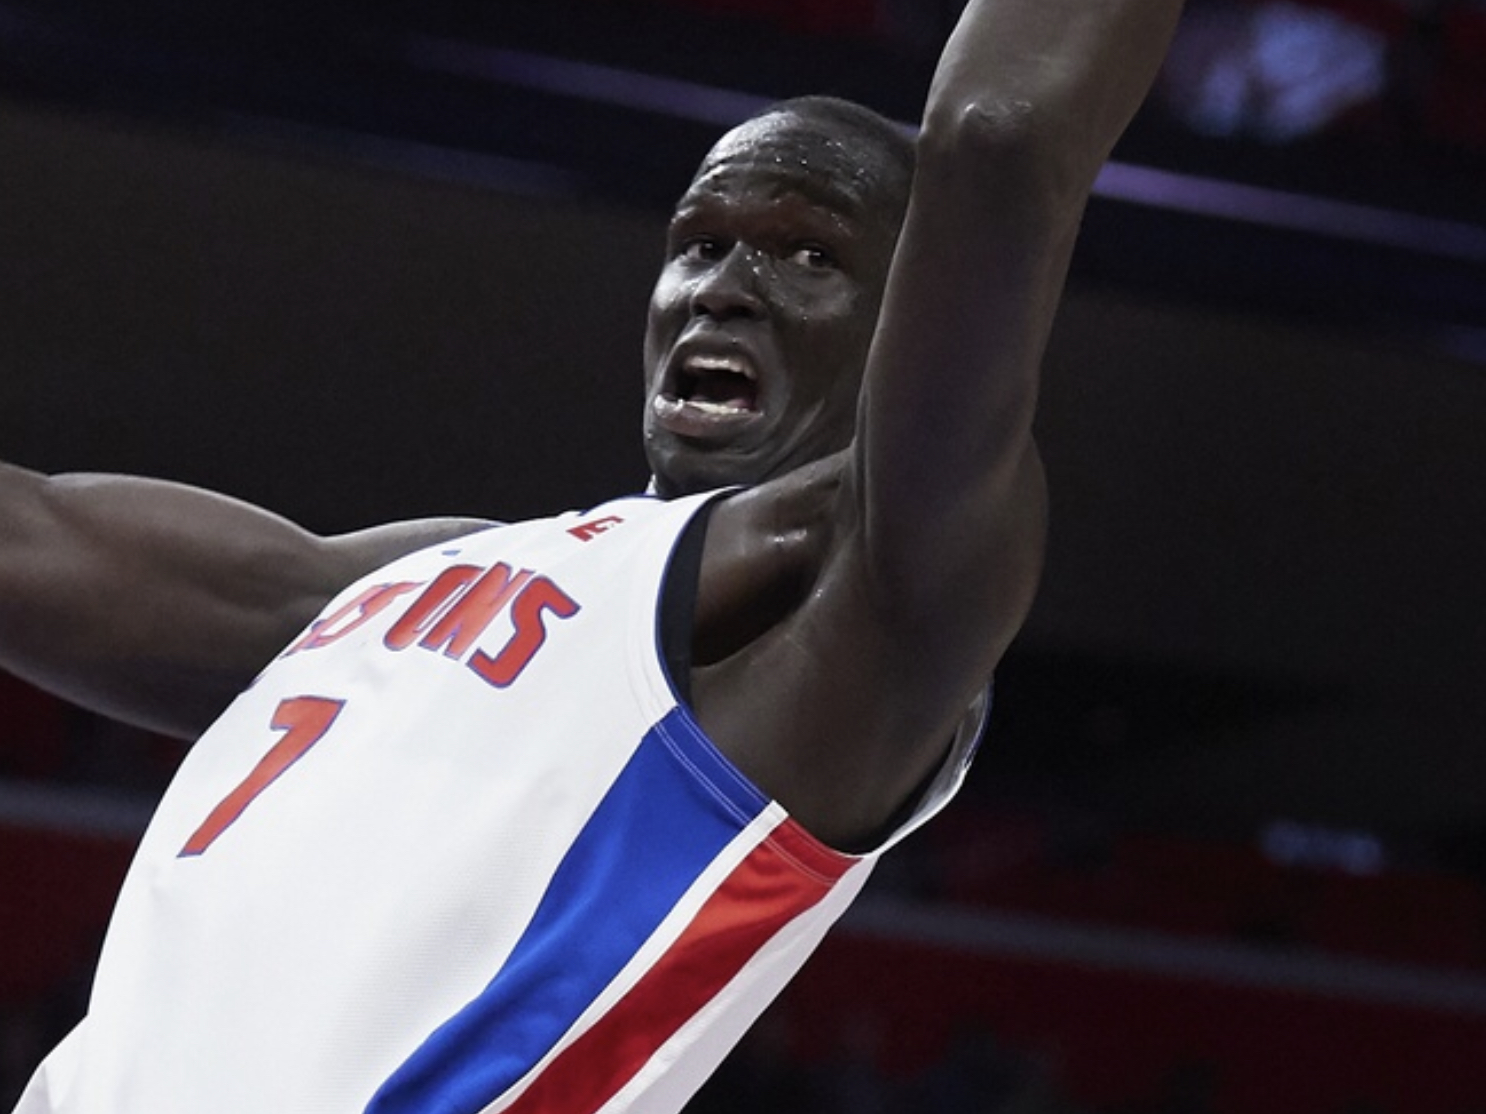 WATCH: Thon Maker literally jumps over opponent